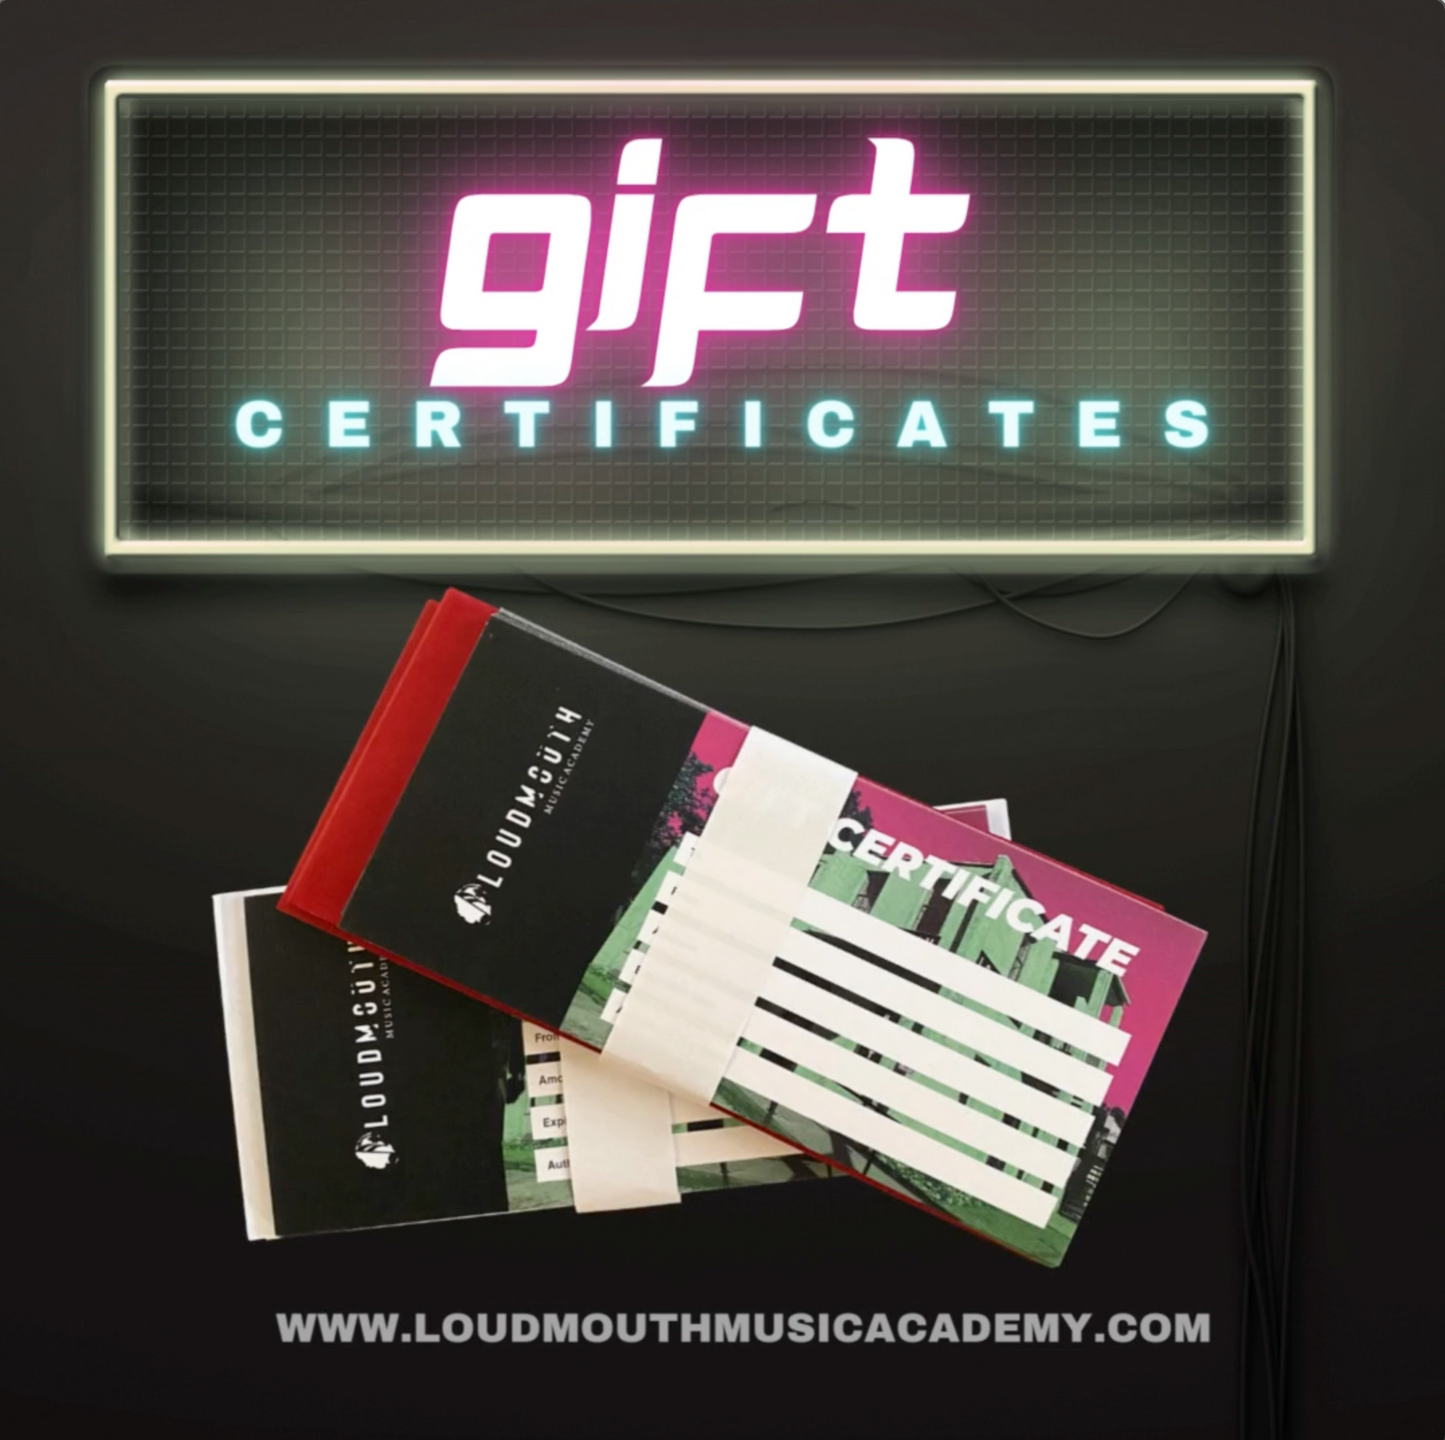 Music Lesson Gift Cards